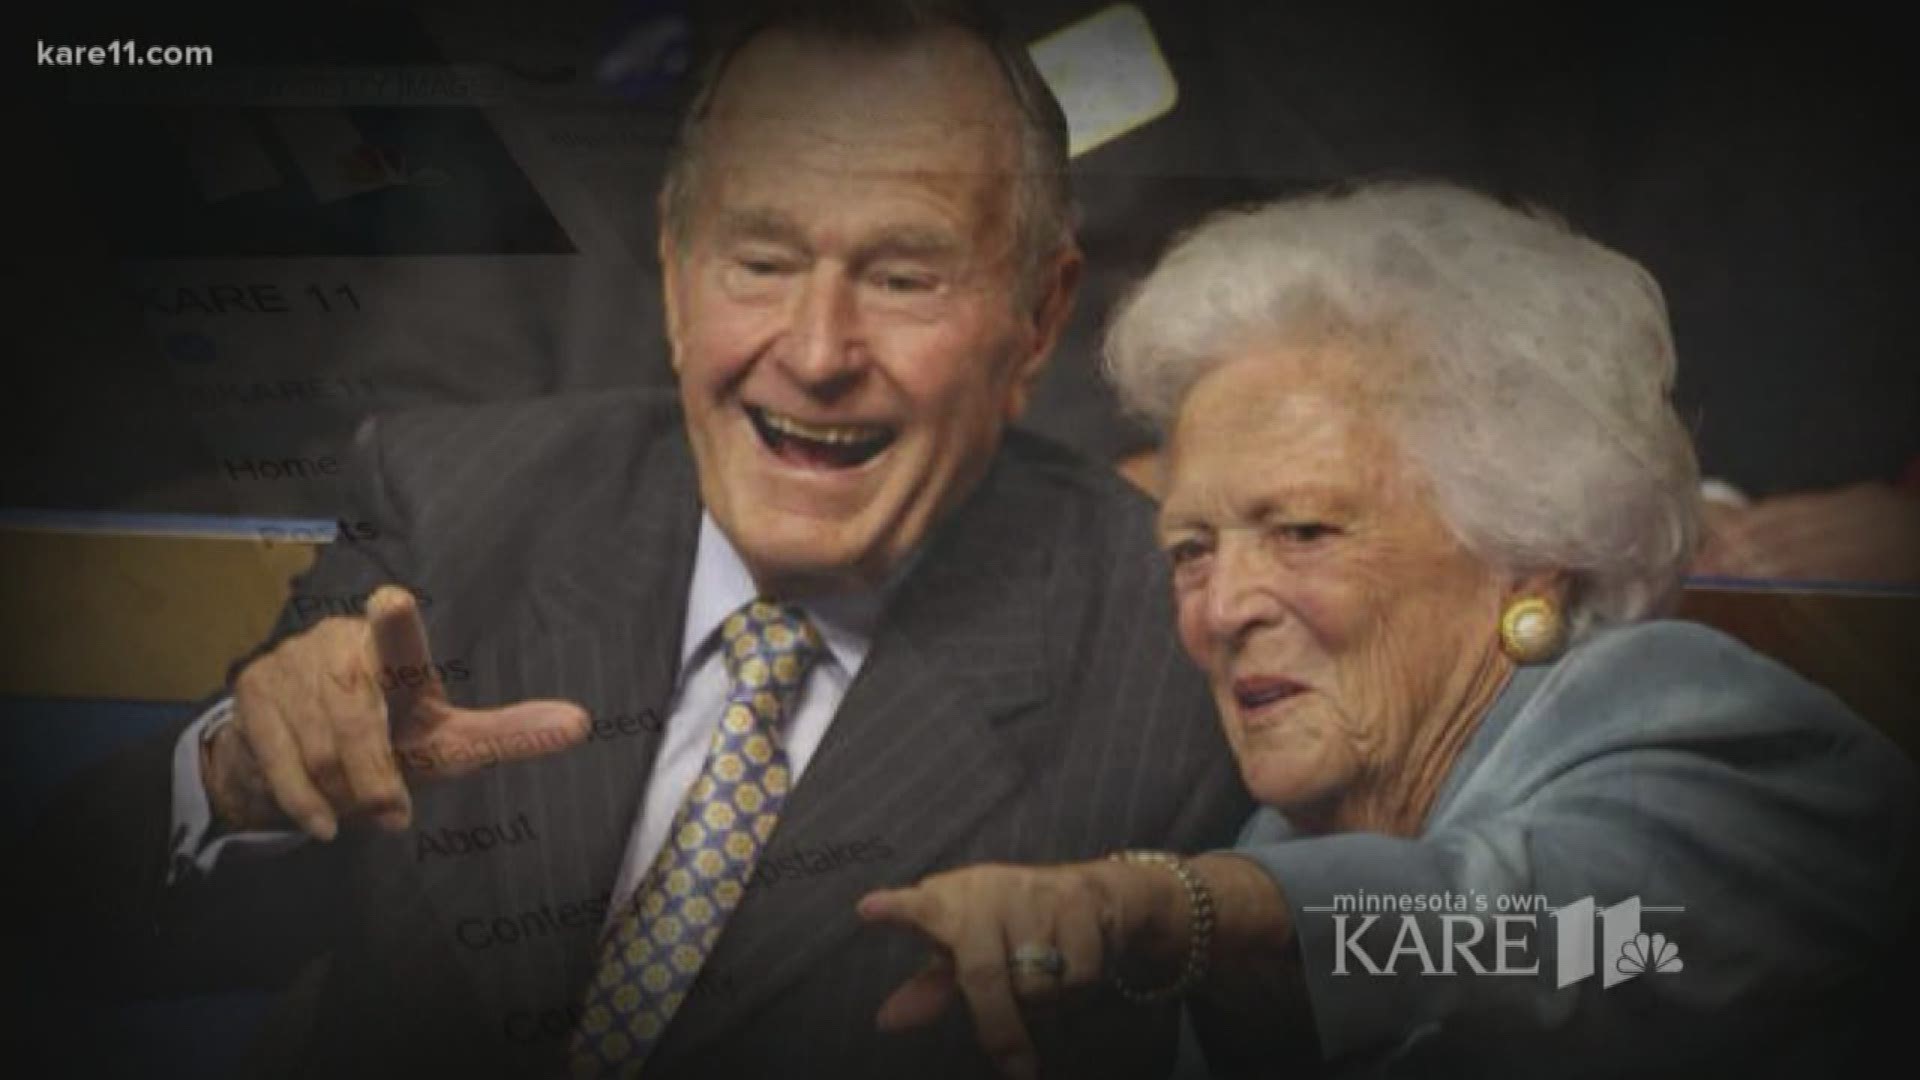 A public viewing will be held Friday and funeral services Saturday for former first lady Barbara Bush. Dylan Wohlenhaus has more: https://kare11.tv/2H6rS3L